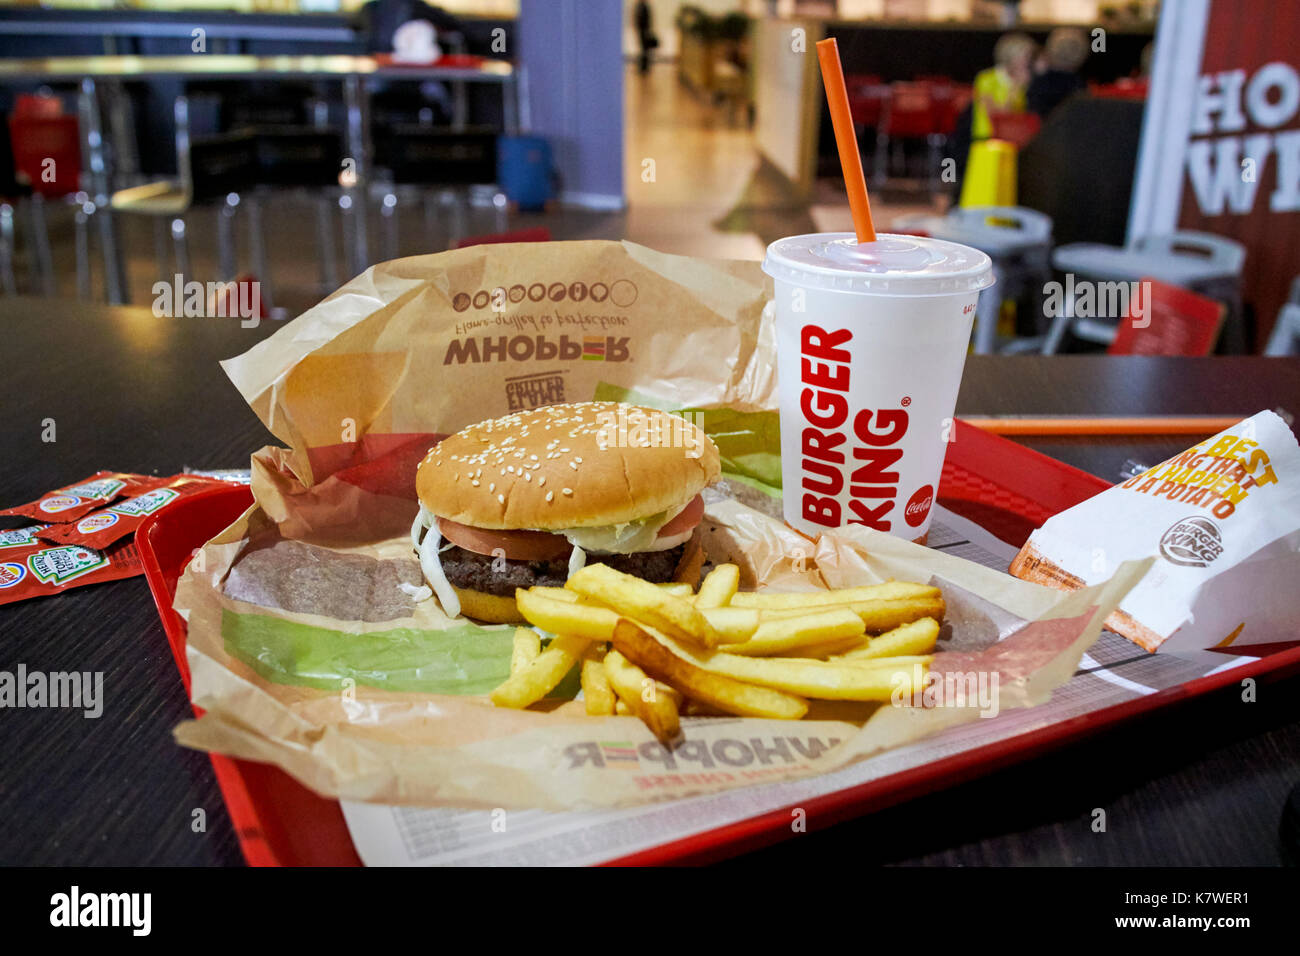 burger king meal on a tray in a restaurant in a regional airport in the uk at night Stock Photo